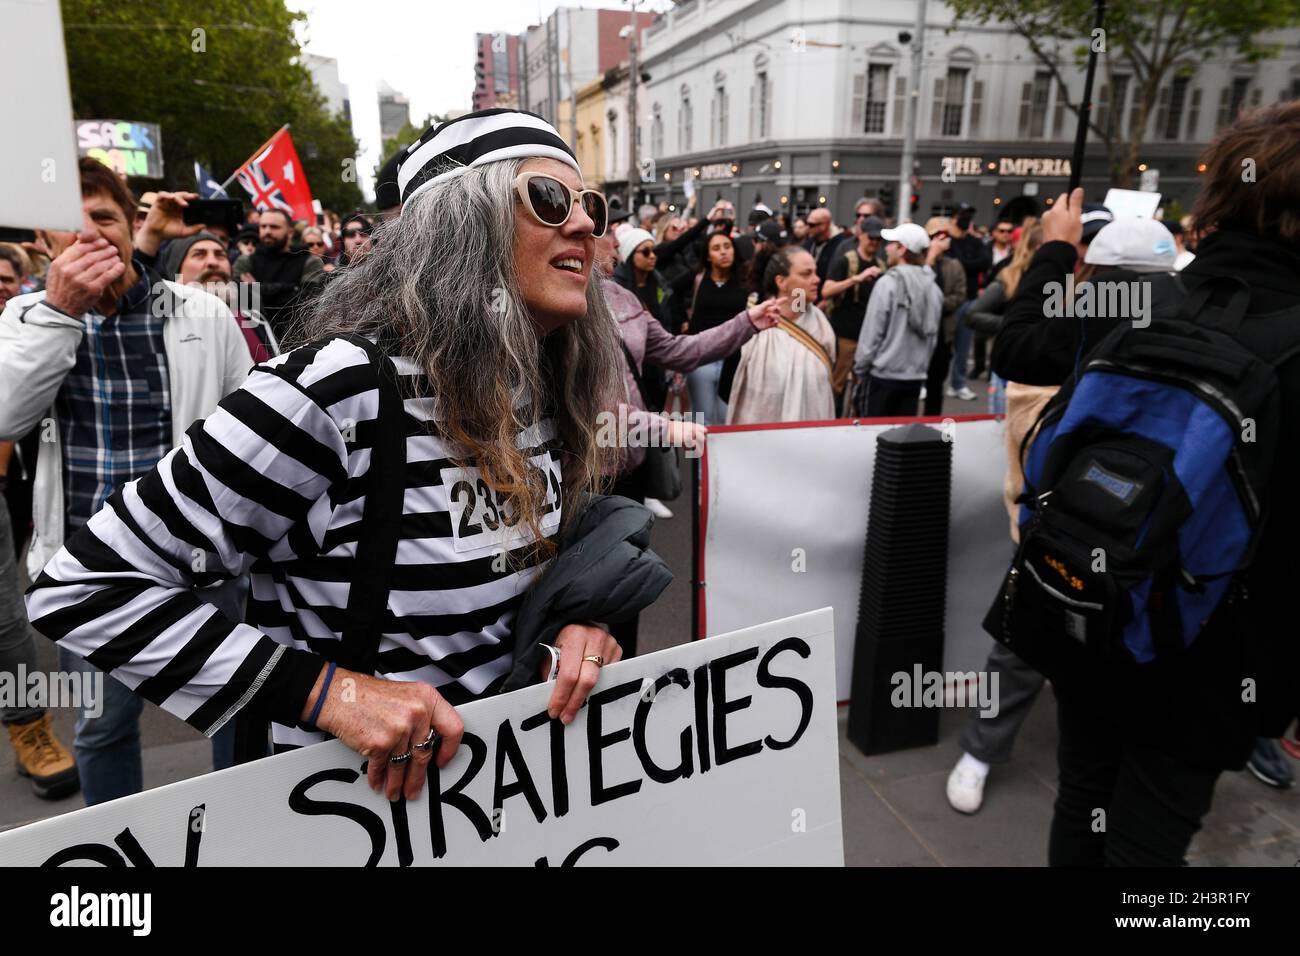 Melbourne, Australia, 30 October, 2021. A Protester in a prisoner costume on the steps of State Parliament during the 'Rise Up! Melbourne Rally' in the CBD to protest vaccine mandates and the proposed laws in state parliament that will allow police to jail anti-lockdown protesters for up to two years. Credit: Michael Currie/Speed Media/Alamy Live News Stock Photo